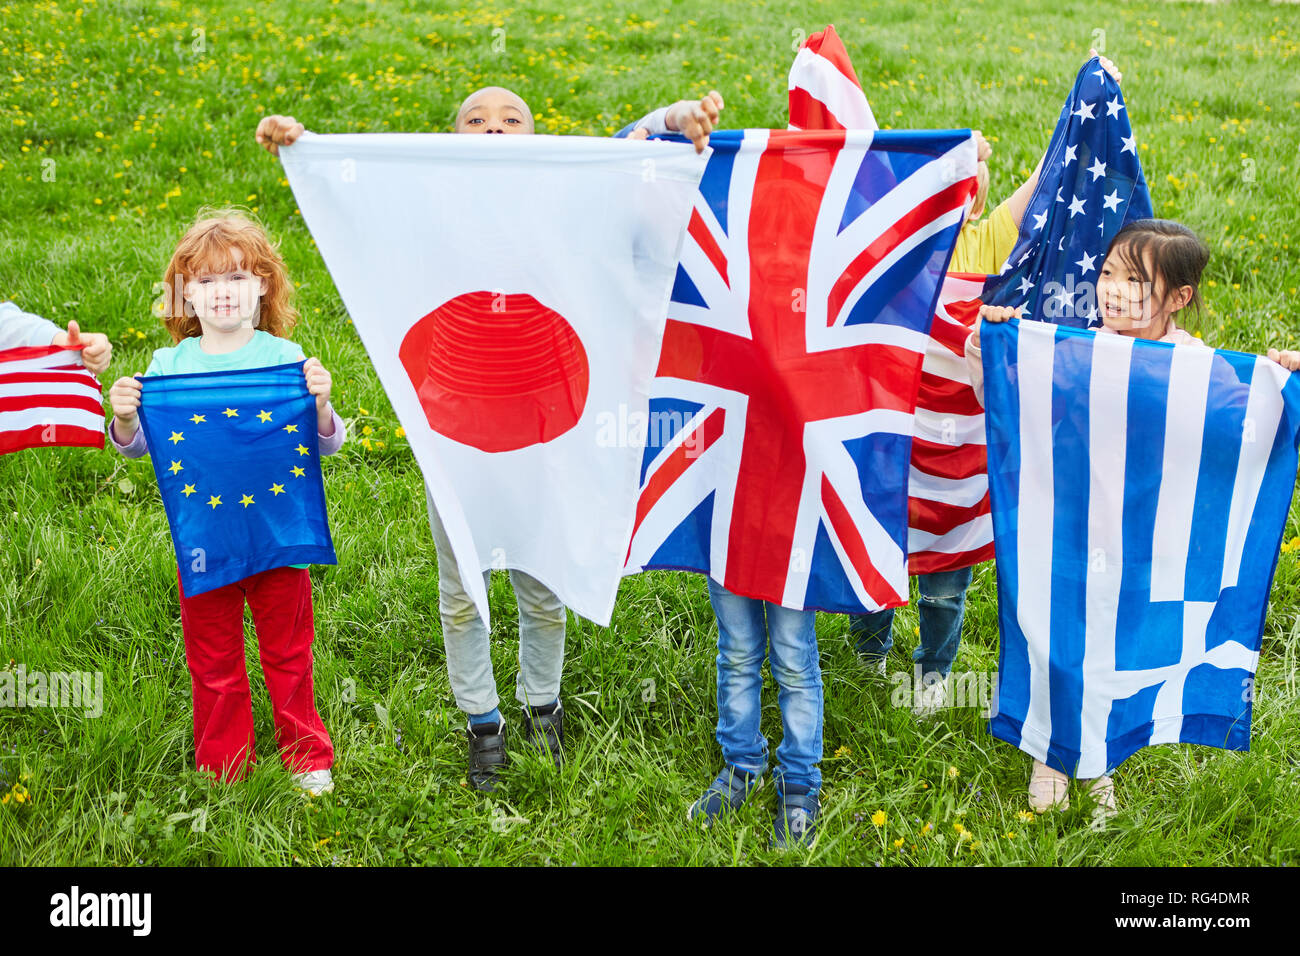 Children in international kindergarten with national flags as a symbol of diversity Stock Photo